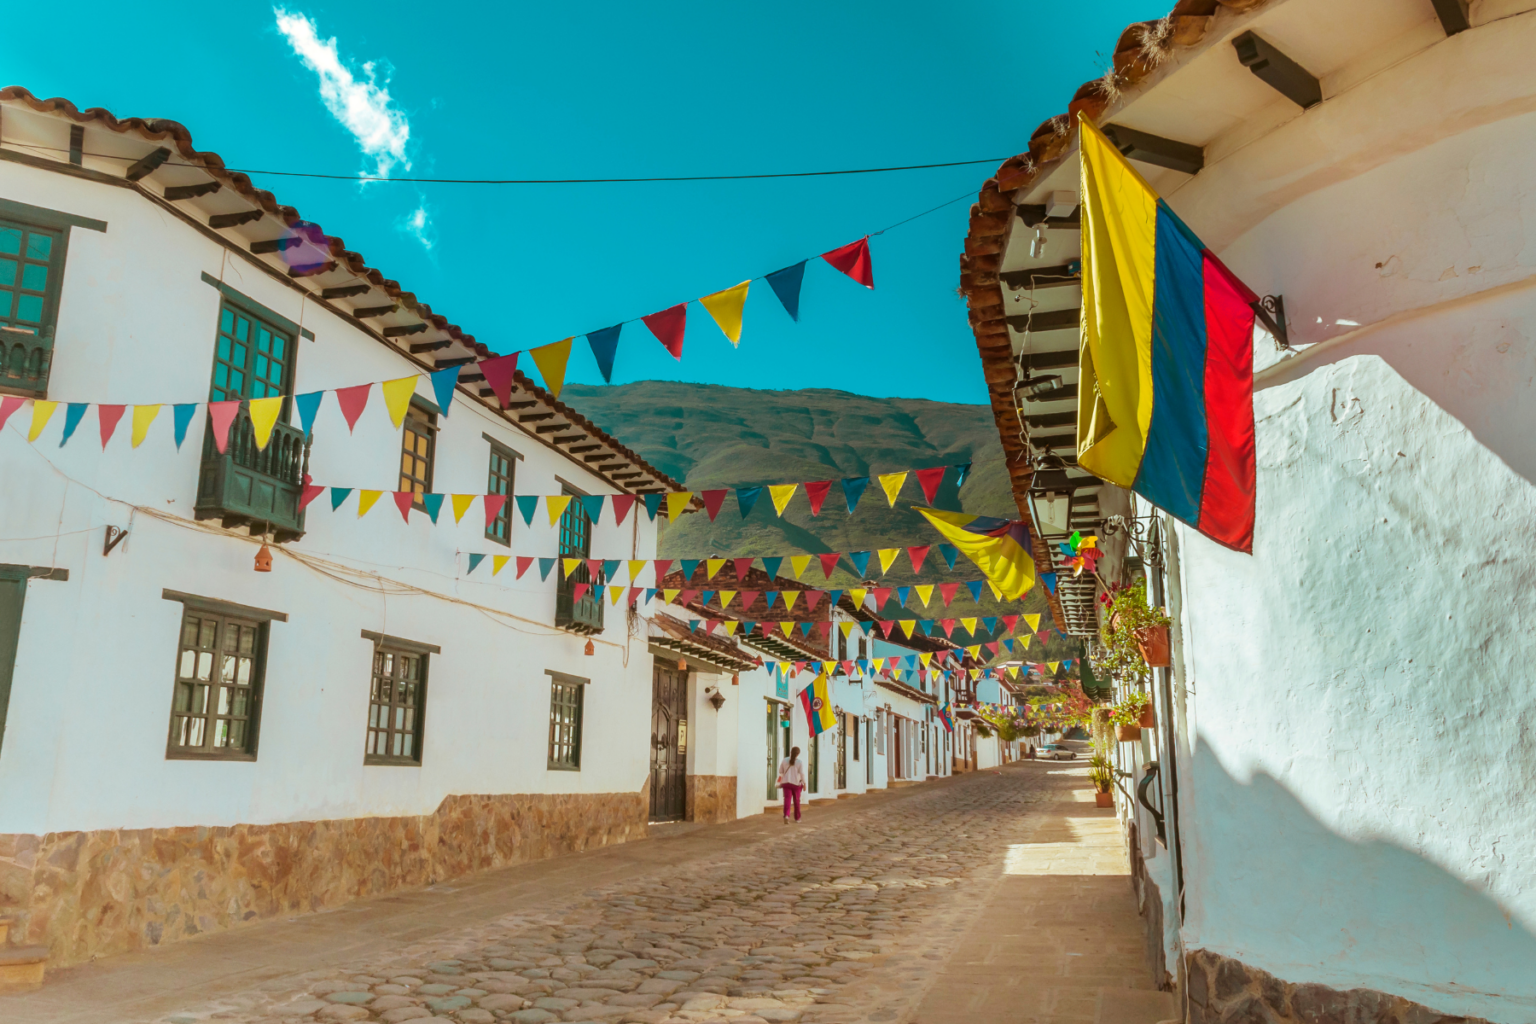 Cobblestone street with white buildings and flags